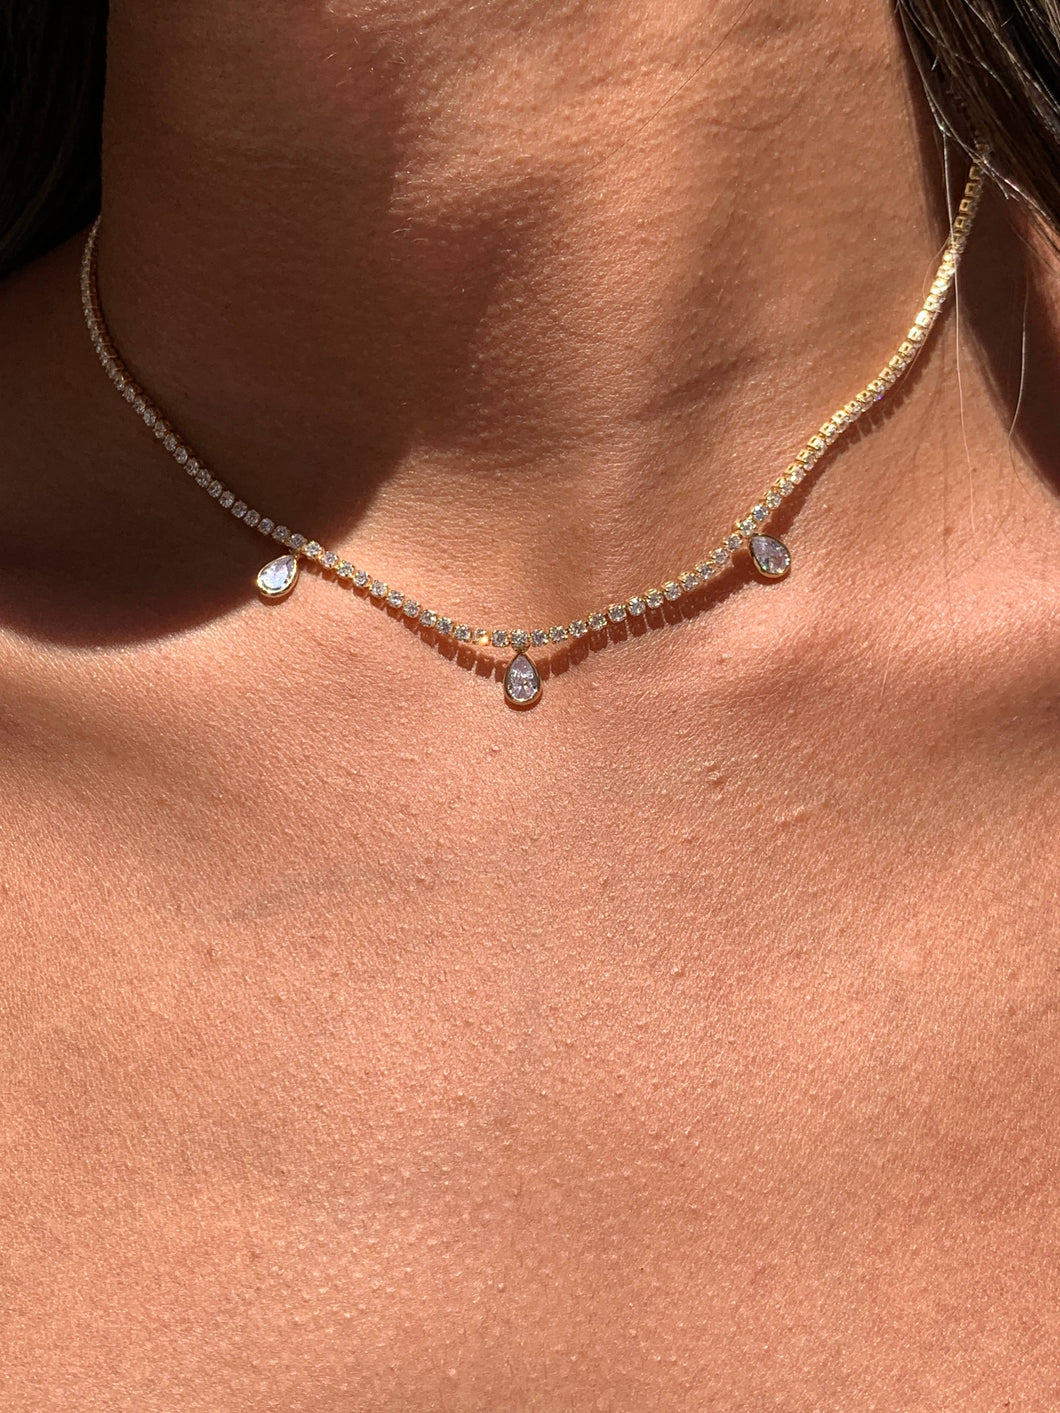 Gold Filled Tennis Necklace with Diamond CZ Tear Drop Accent